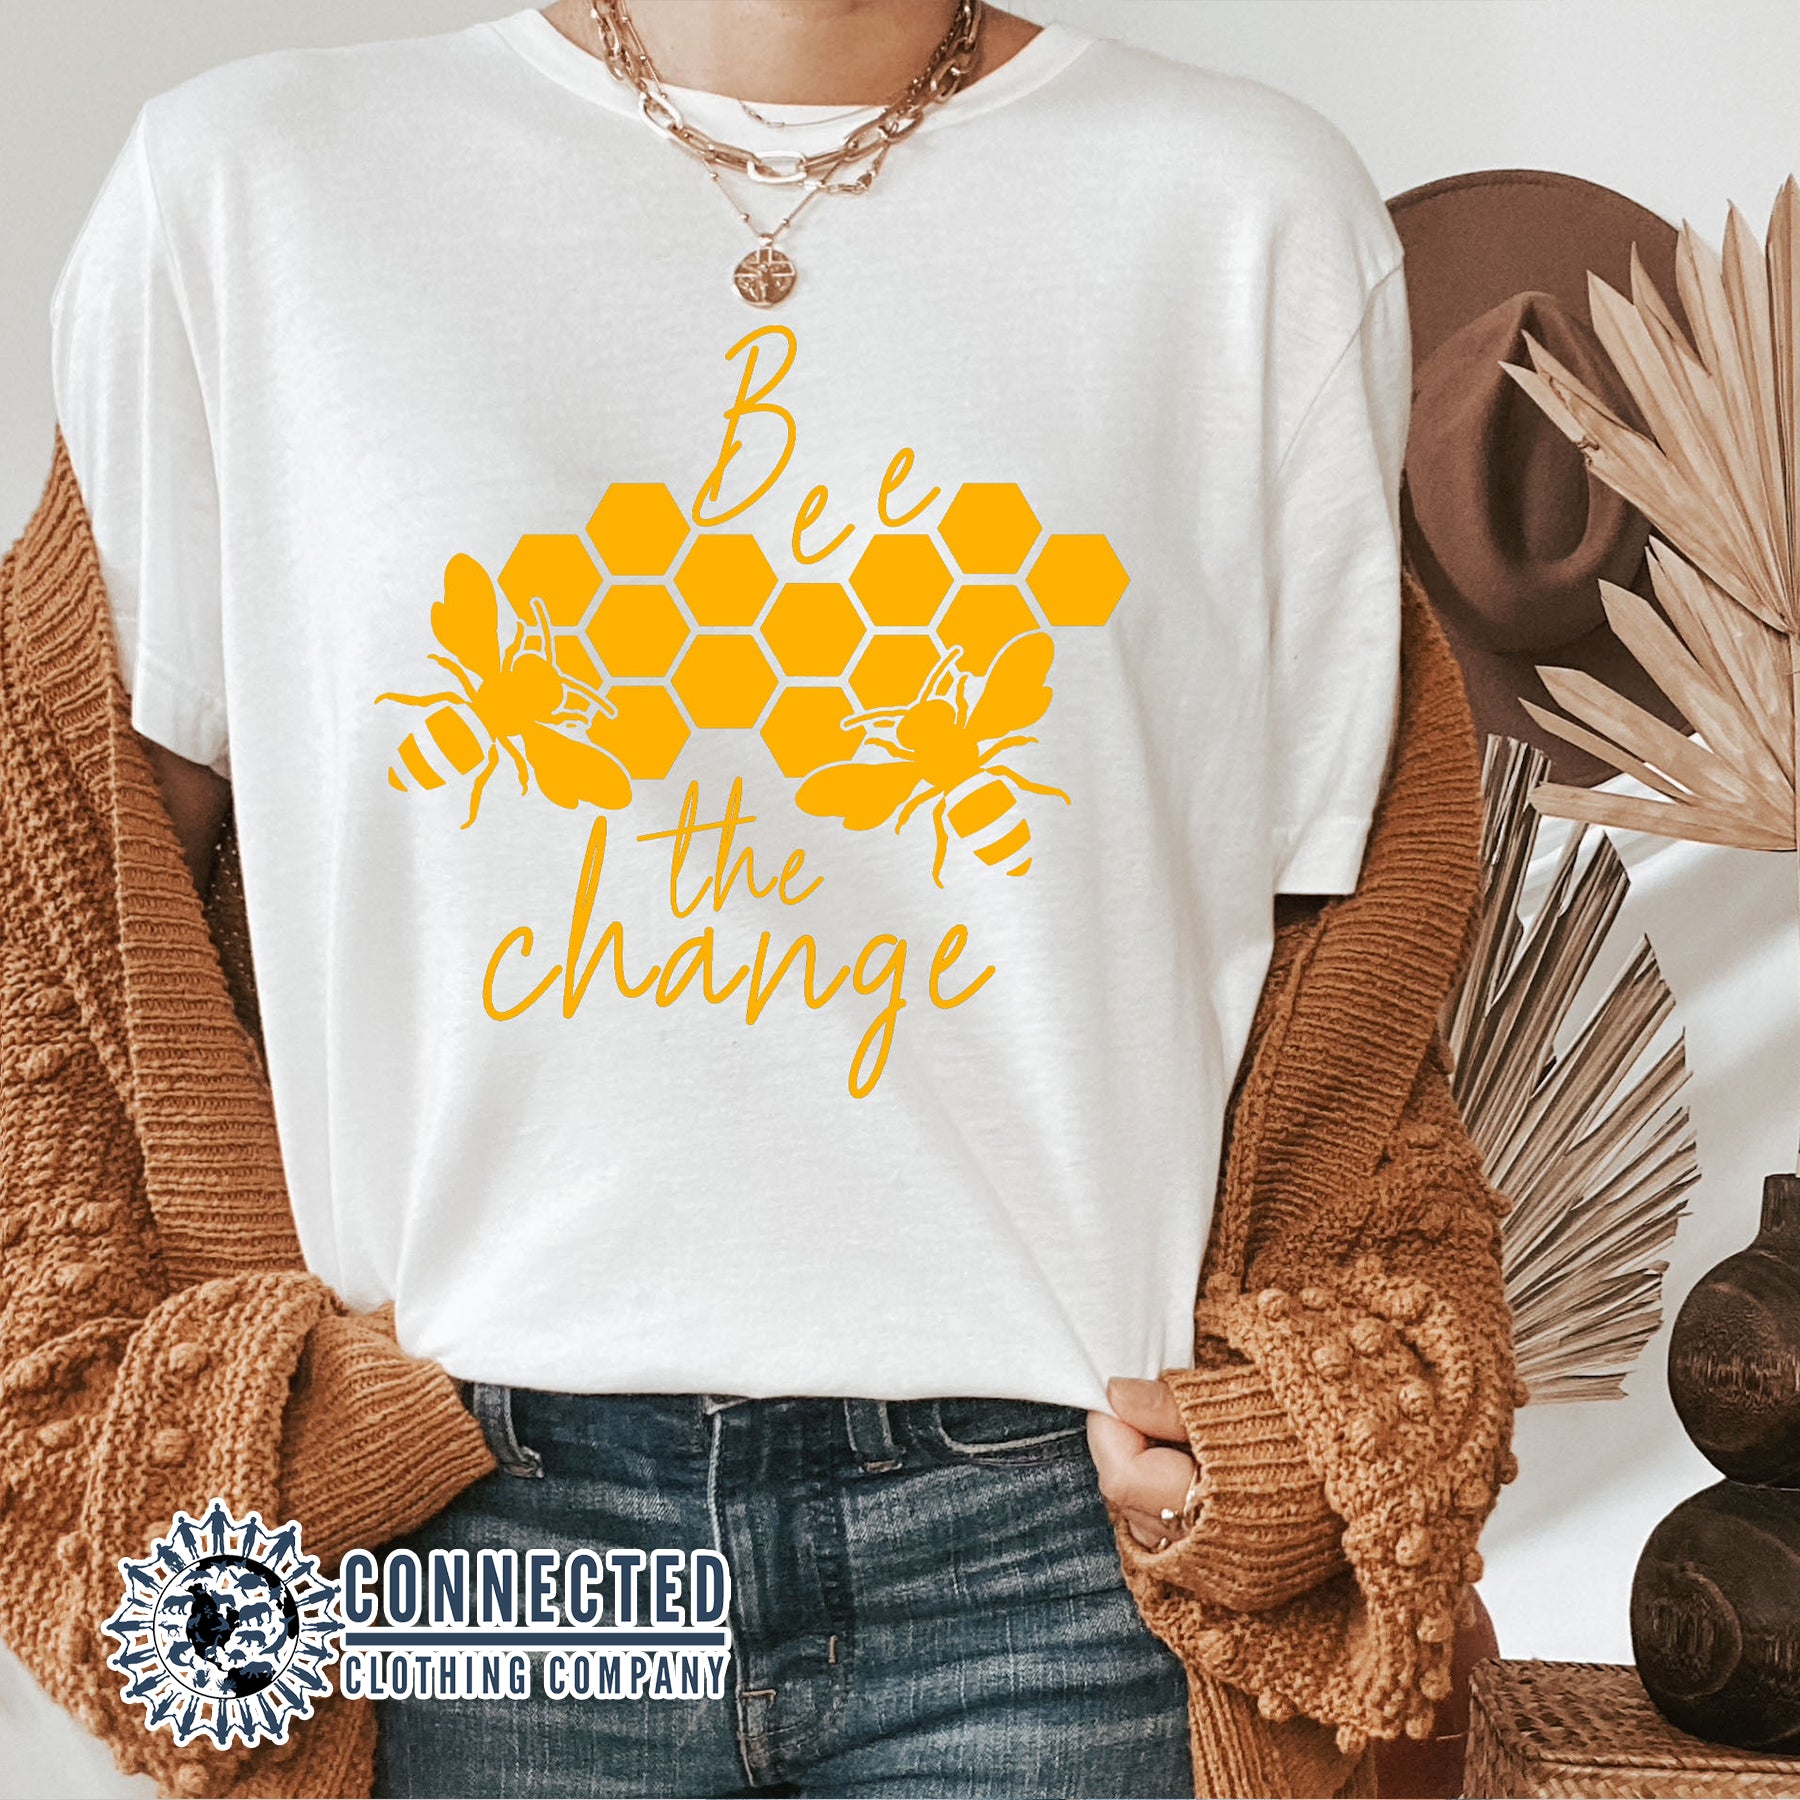 Model Wearing White Bee The Change Short-Sleeve Tee - Connected Clothing Company - 10% of profits donated to the Honeybee Conservancy